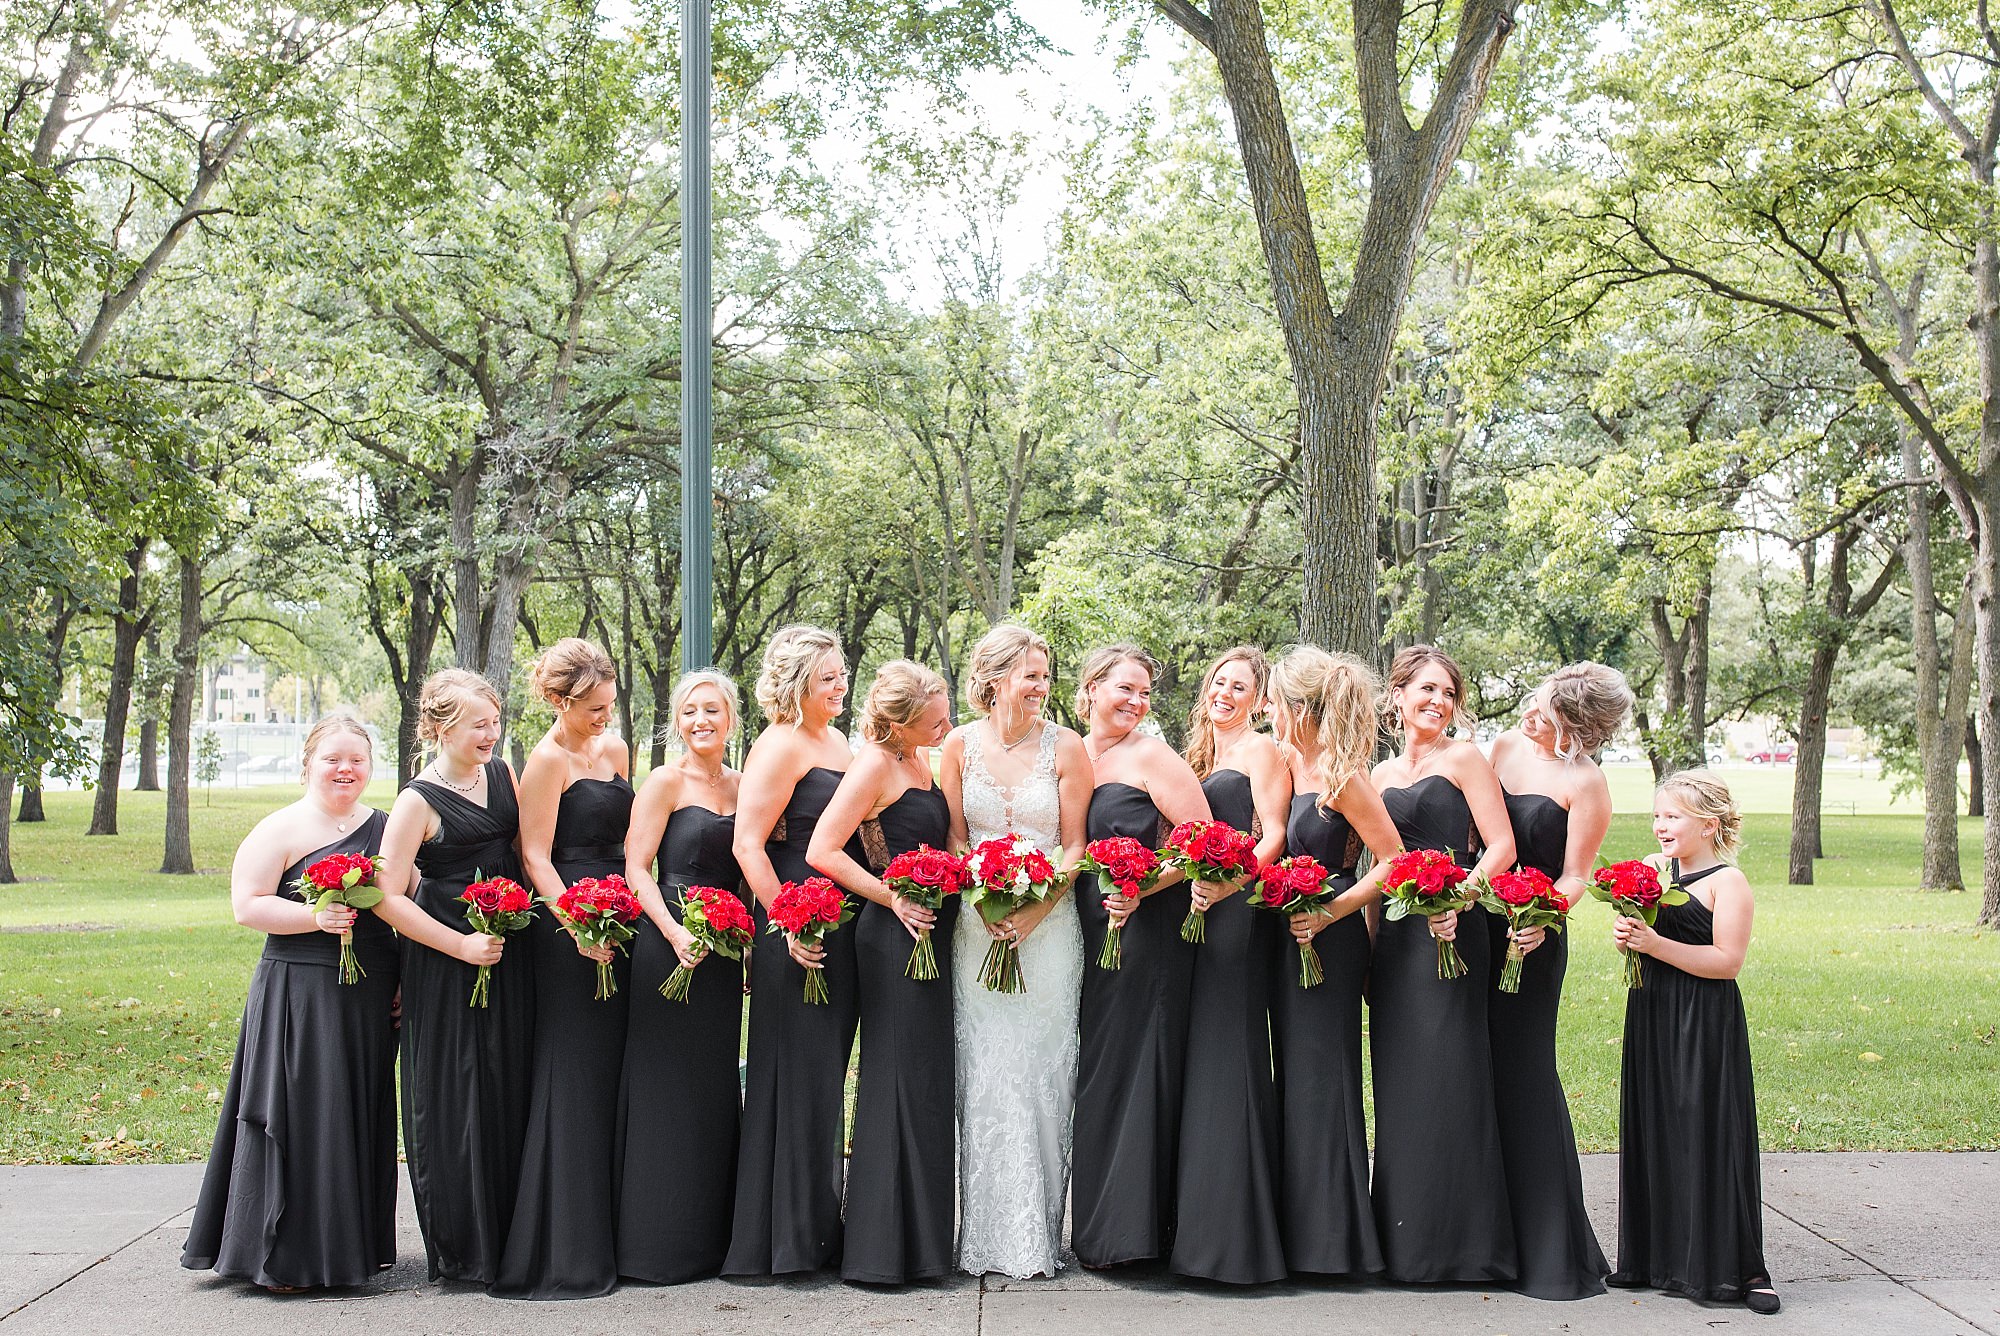 Bridesmaids in black glamorous dressed hold red rose bouquets